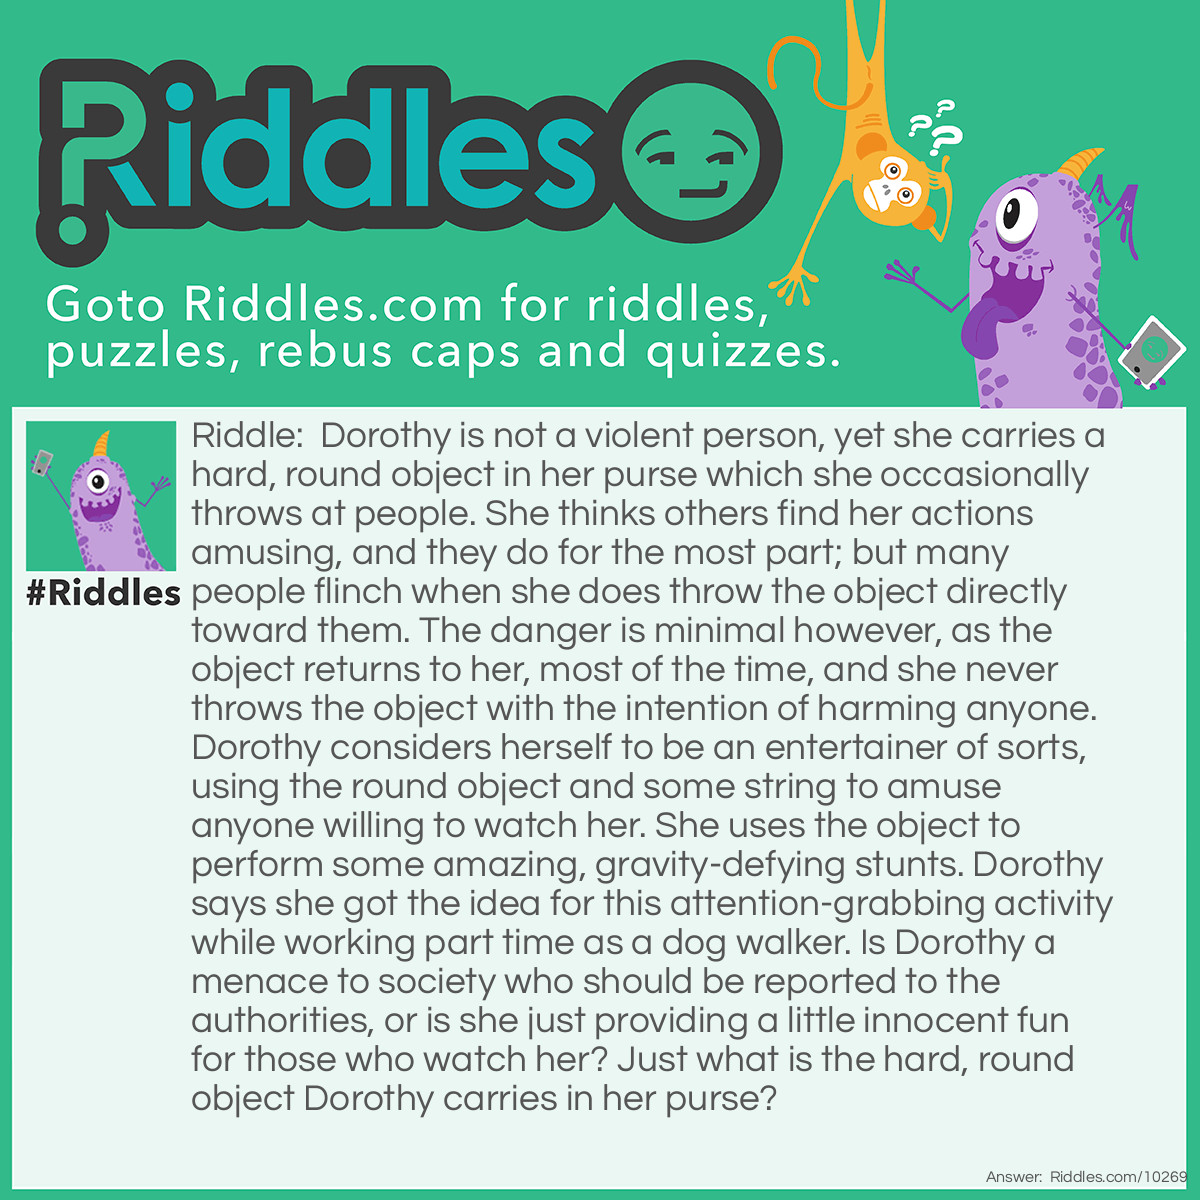 Riddle: Dorothy is not a violent person, yet she carries a hard, round object in her purse which she occasionally throws at people. She thinks others find her actions <a href="../../../funny-riddles">amusing</a>, and they do for the most part; but many people flinch when she does throw the object directly toward them. The danger is minimal however, as the object returns to her, most of the time, and she never throws the object with the intention of harming anyone. Dorothy considers herself to be an entertainer of sorts, using the round object and some string to amuse anyone willing to watch her. She uses the object to perform some amazing, gravity-defying stunts. Dorothy says she got the idea for this attention-grabbing activity while working part time as a dog walker. Is Dorothy a menace to society who should be reported to the authorities, or is she just providing a little innocent fun for those who watch her? Just what is the hard, round object Dorothy carries in her purse? Answer: Dorothy carries a yo-yo in her purse, and puts on a dazzling display of various tricks for onlookers. She even performs classic yo-yo moves such as the famous walk-the-dog maneuver.